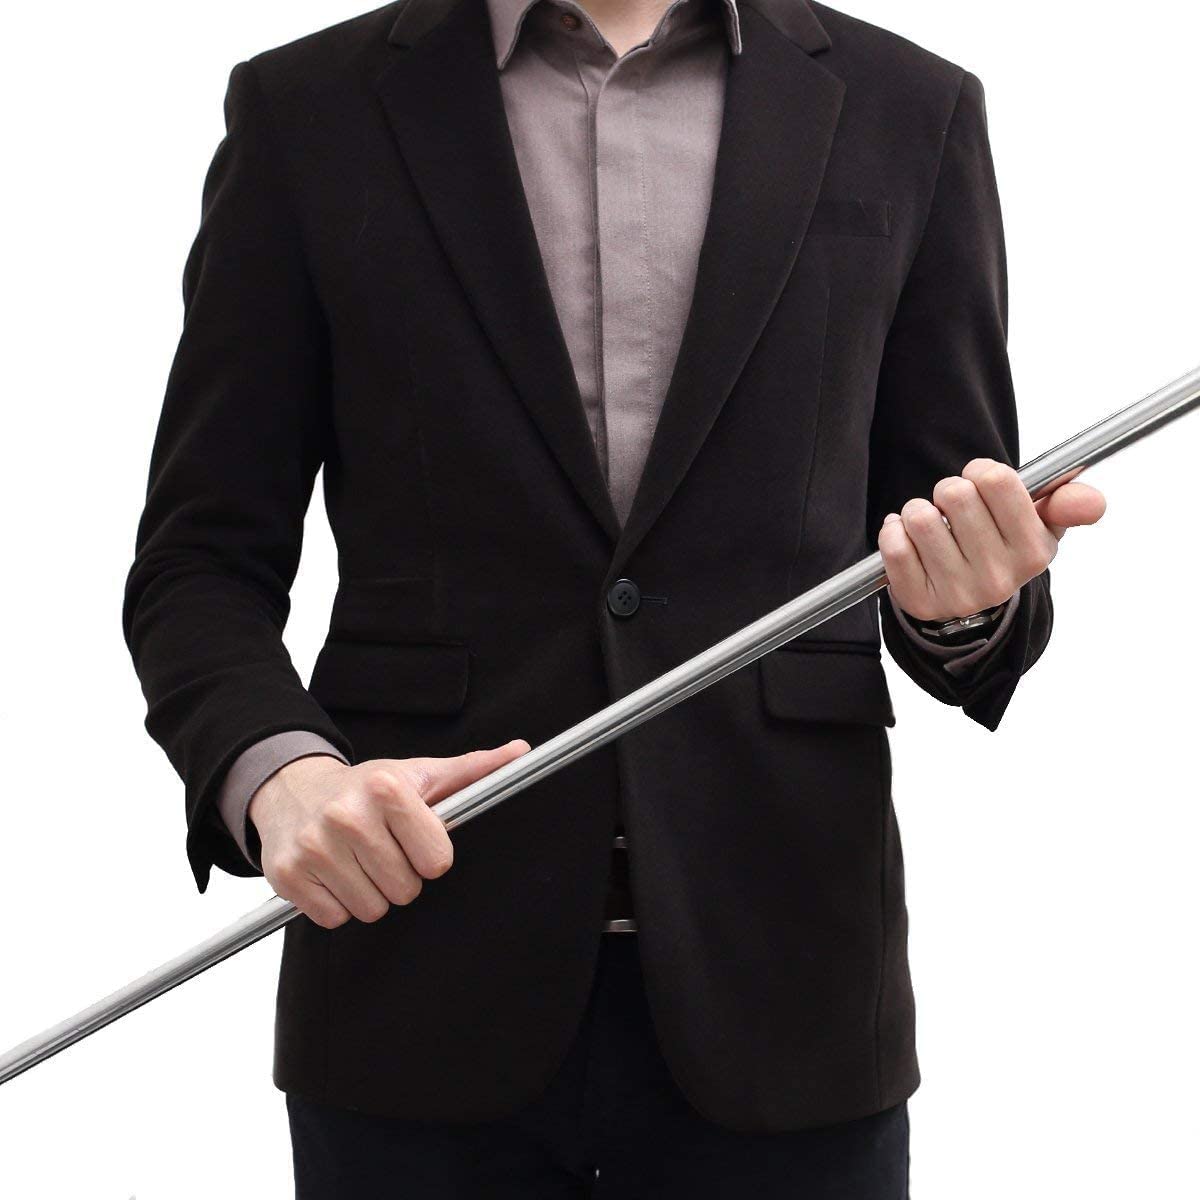 Mesmerize Your Audience with the Magic Stick Silver Appearing Cane - A Professional Trick Prop for Magicians!